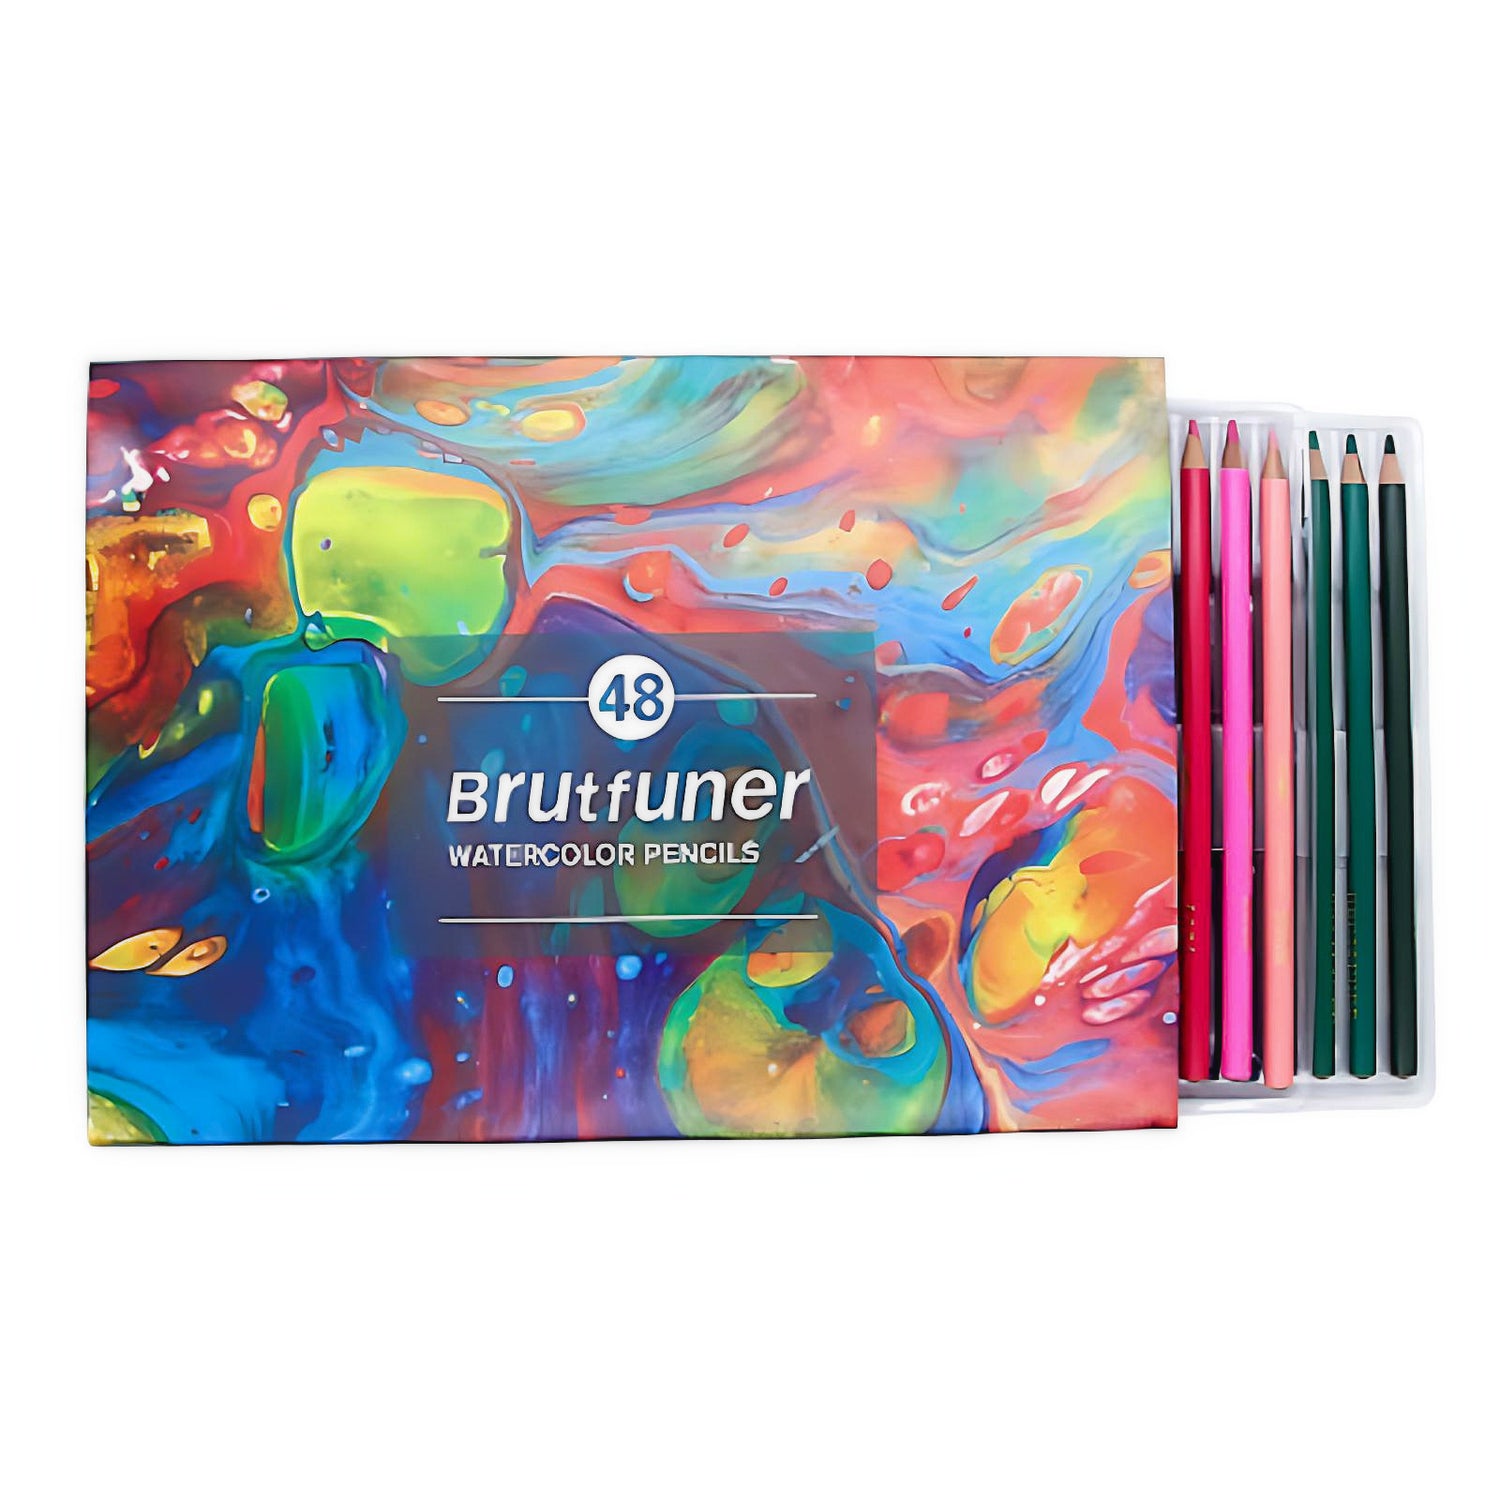 a 48 set of Brutfuner watercolor pencils on a white background